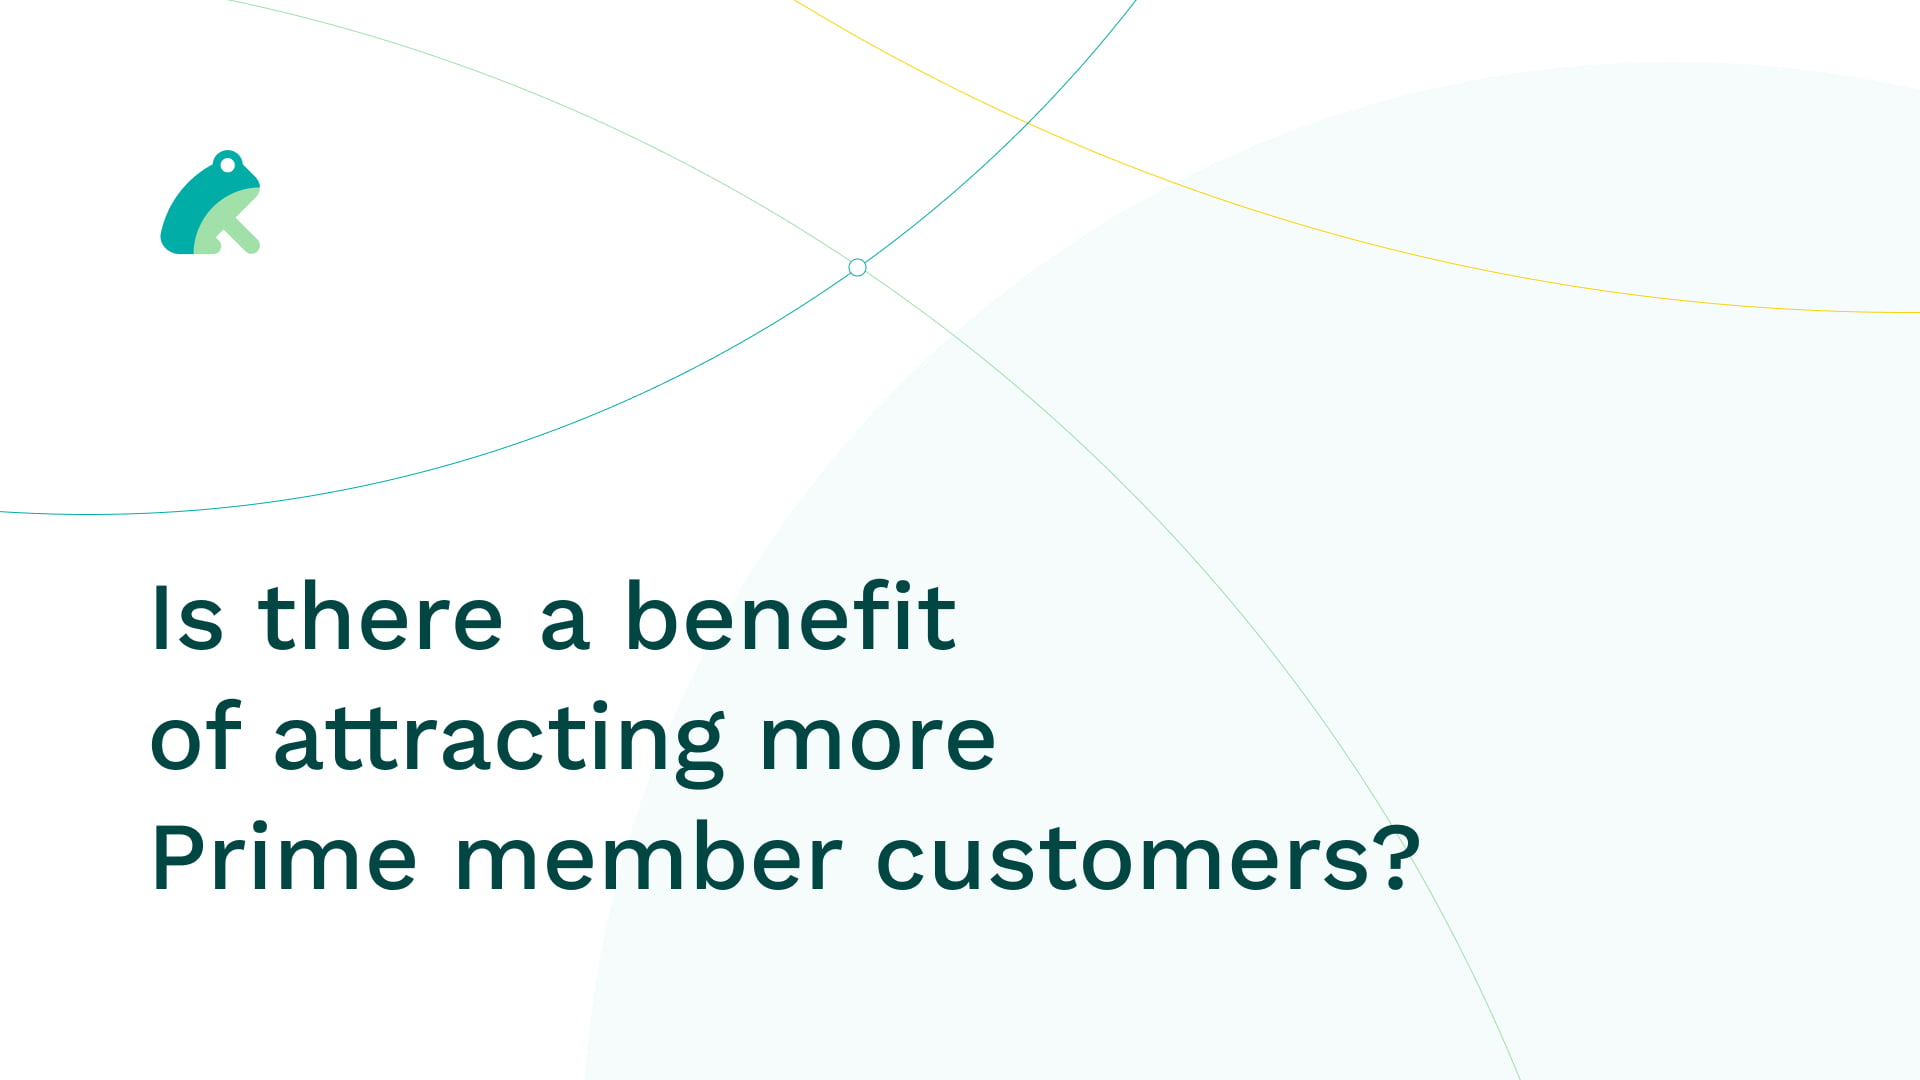 Is there a benefit of attracting more Prime member customers?